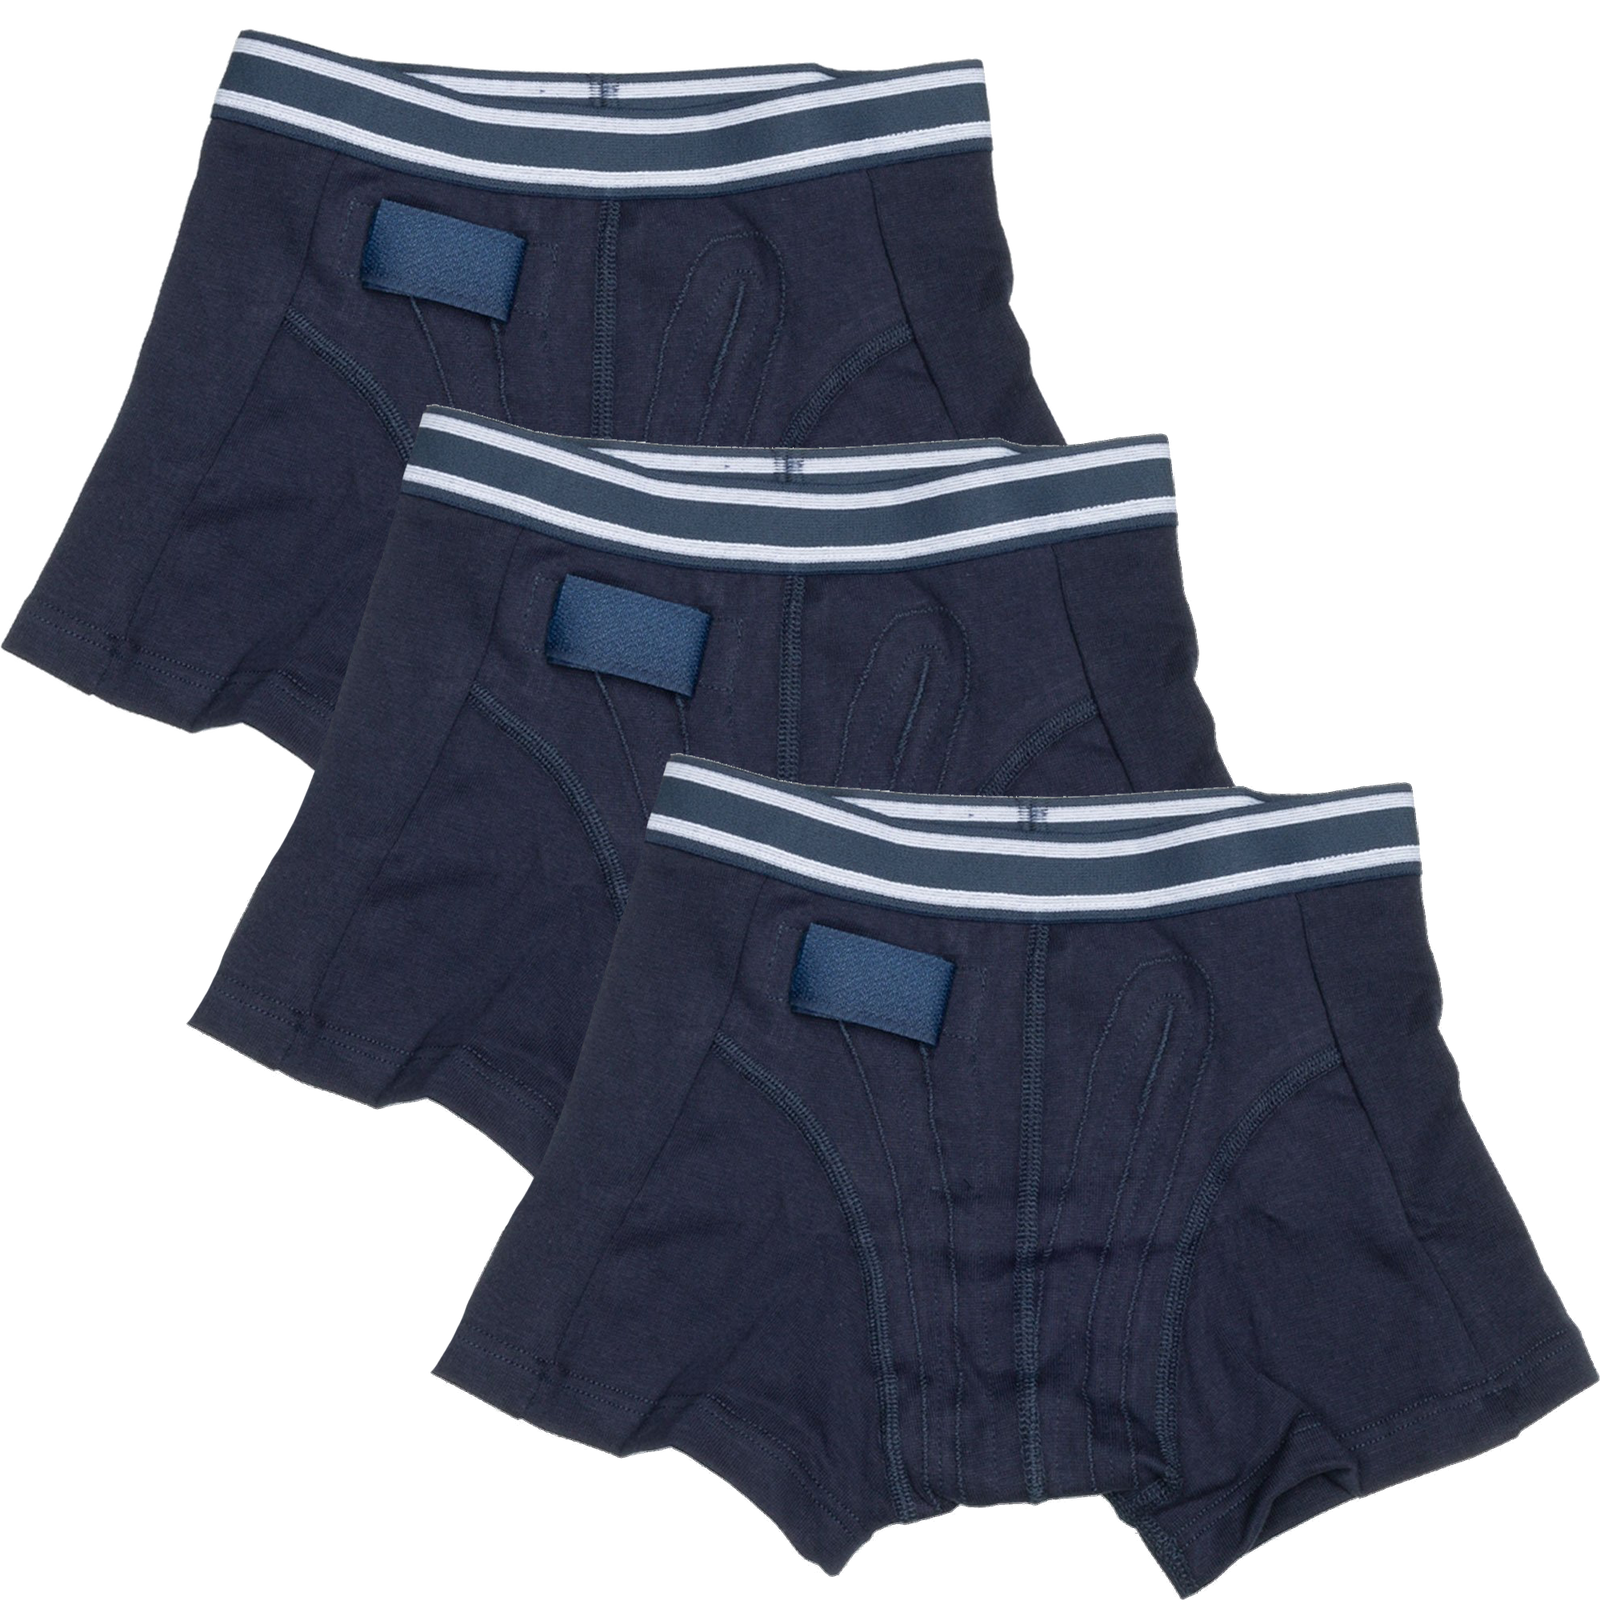 My Private Pocket Underwear for Boys - Variety 3 Pack - Bedwetting